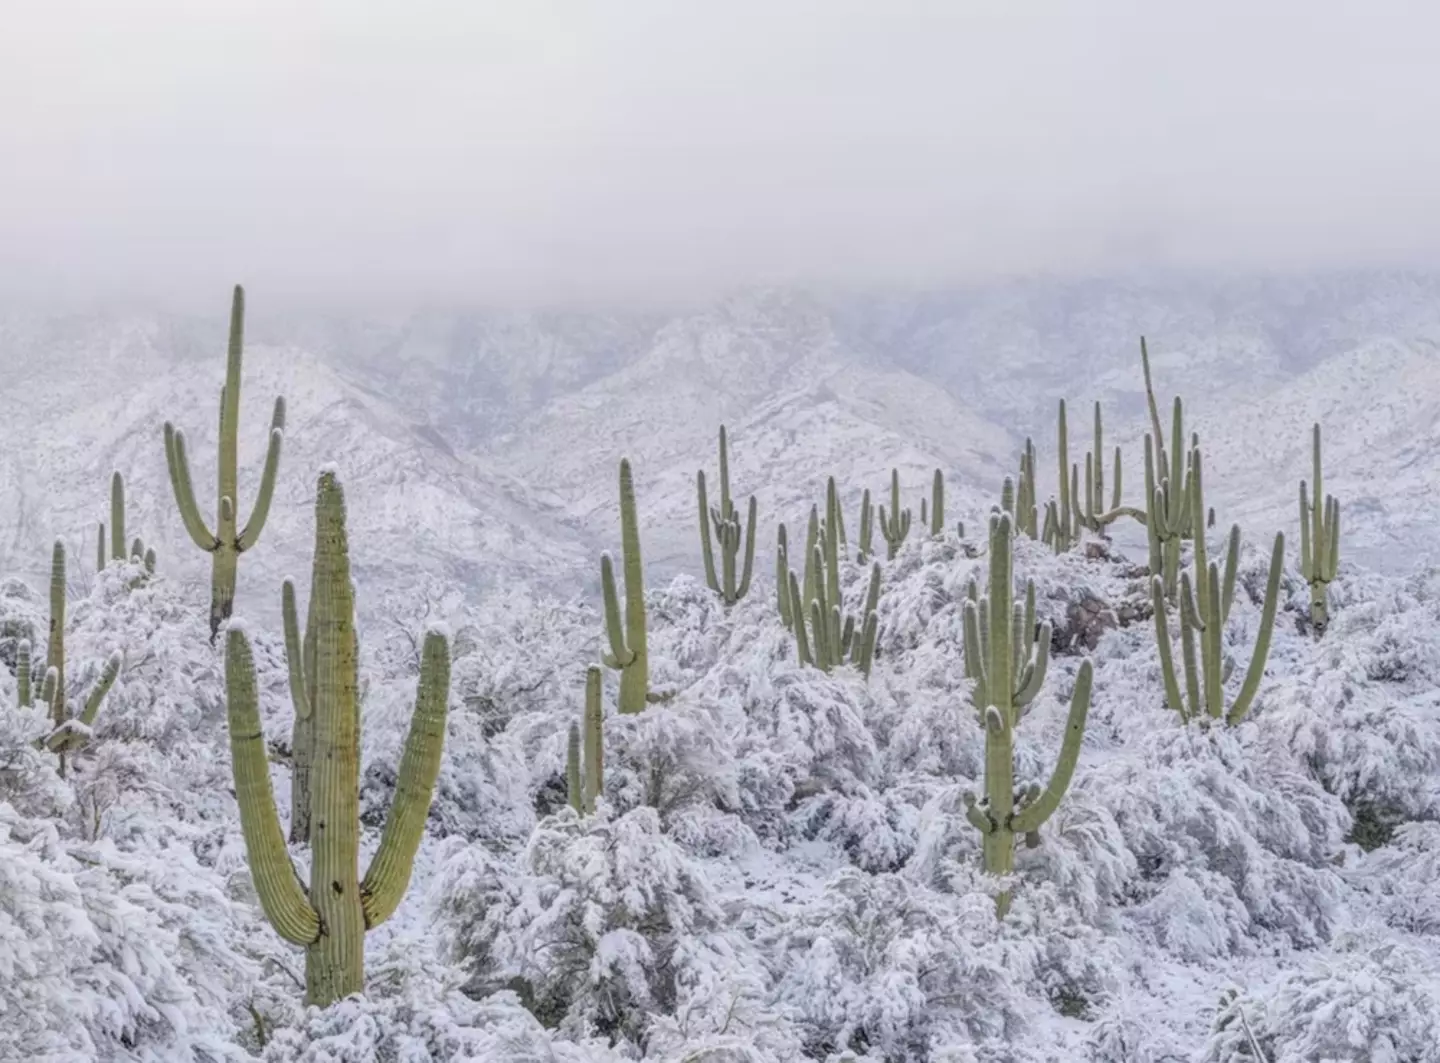 It's not often you see thick snow in the desert.